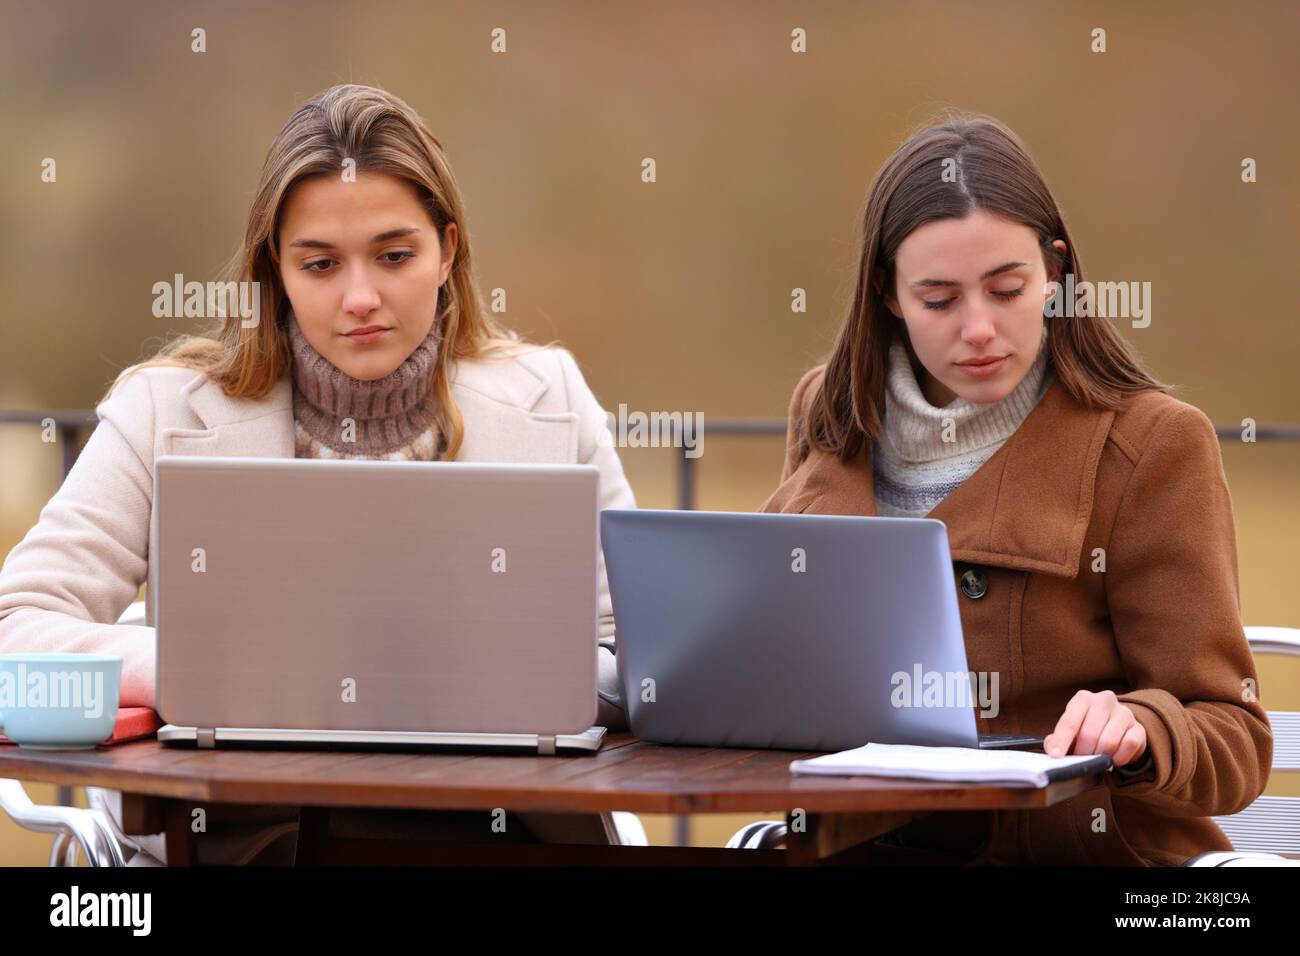 Front view of two students studying using laptops in winter Stock Photo